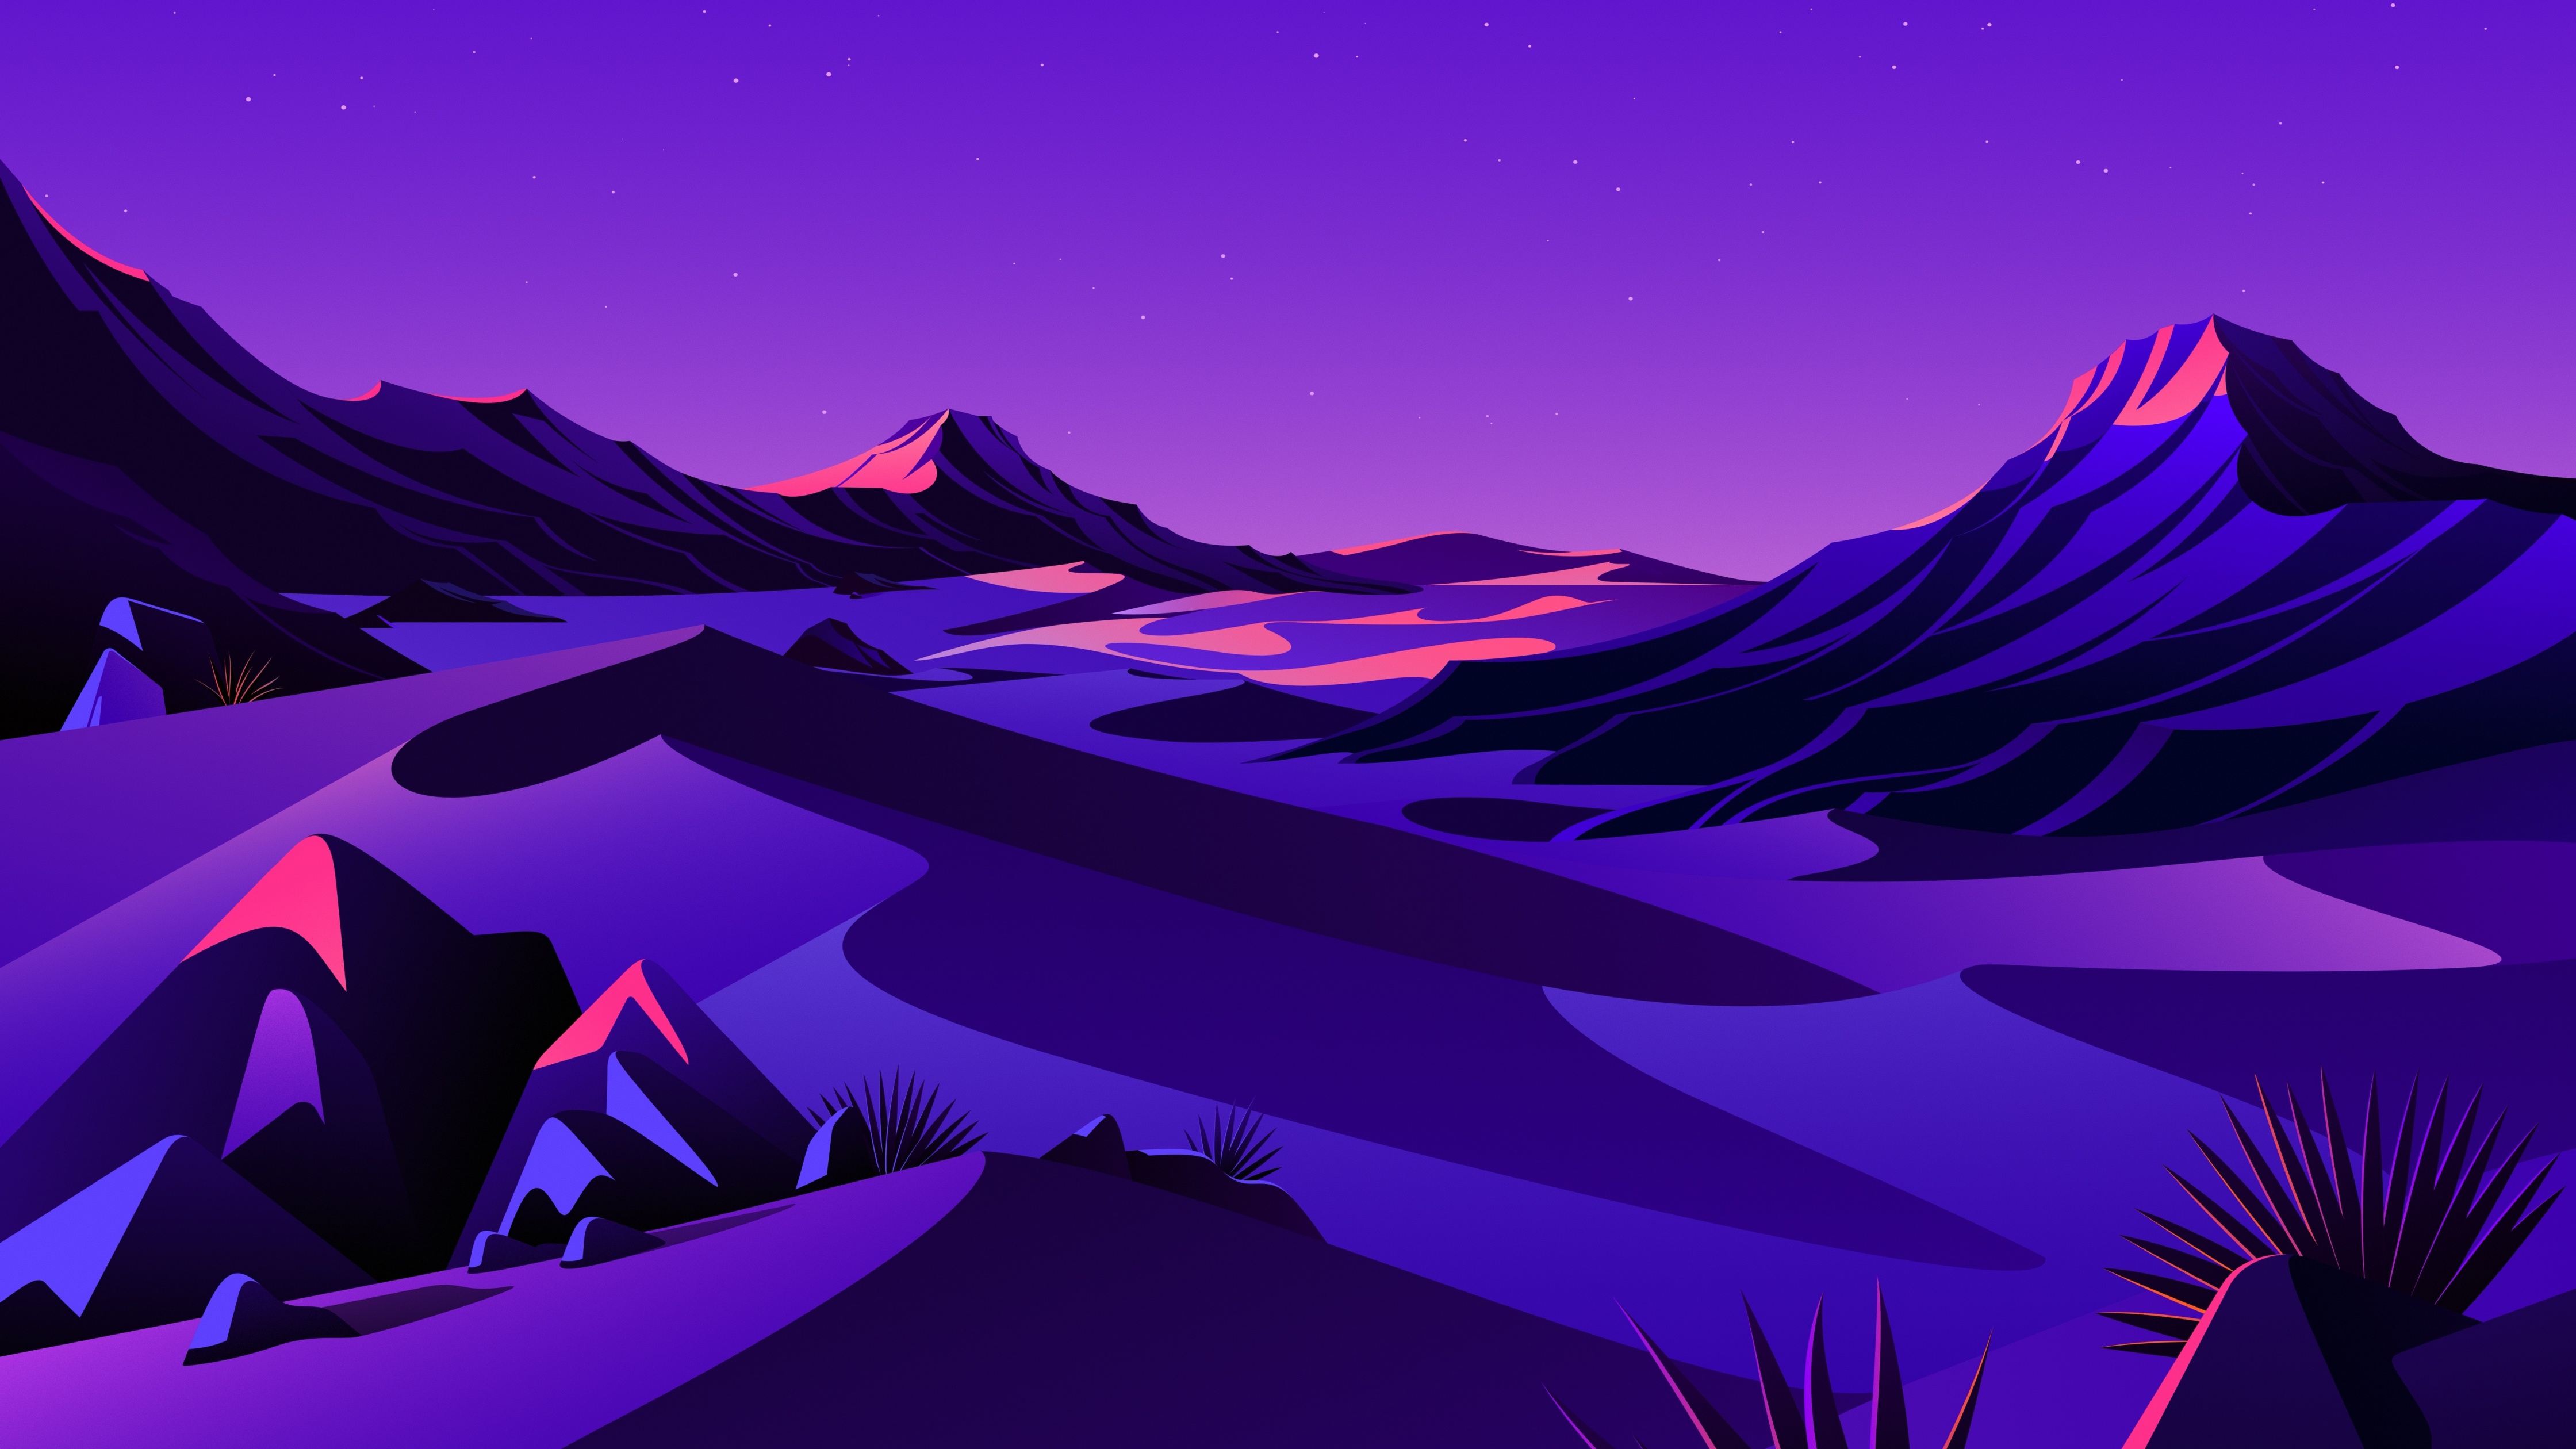 Mesmerizing Wallpaper purple landscape Images, Videos, and News